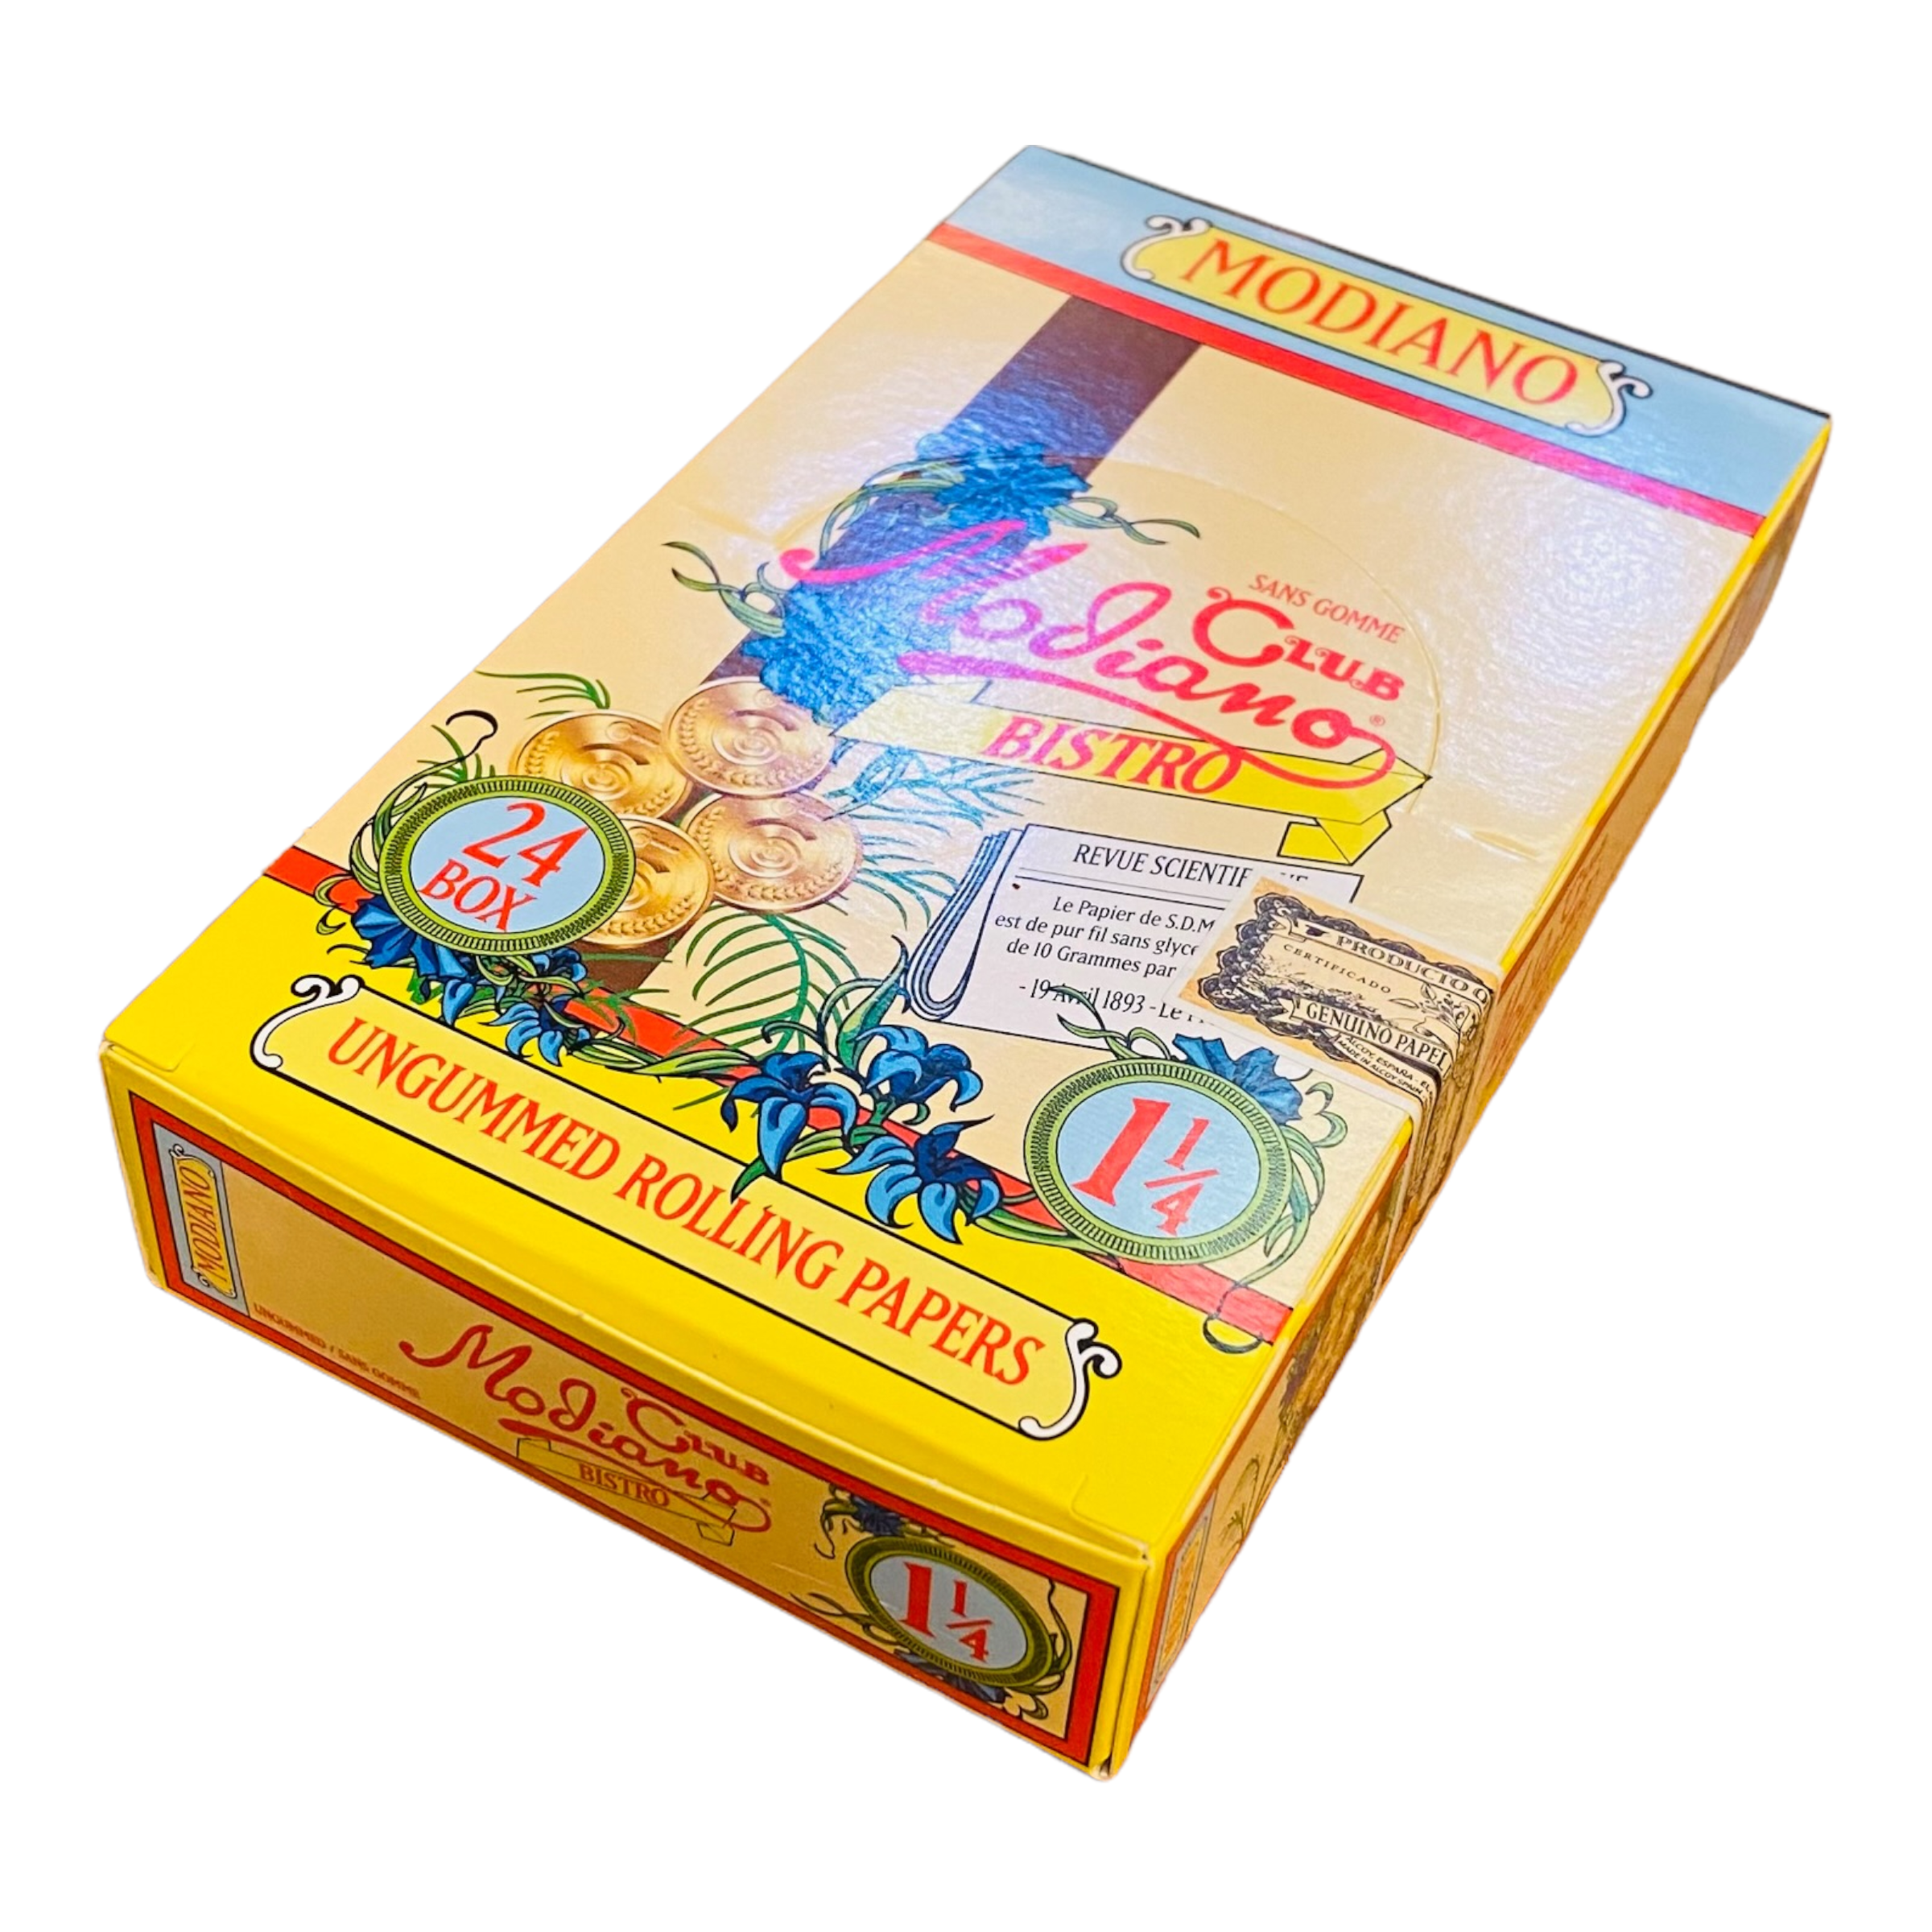 Club Modiano - BOX Of 1.25 UnGummed Papers - 24 Pack Box